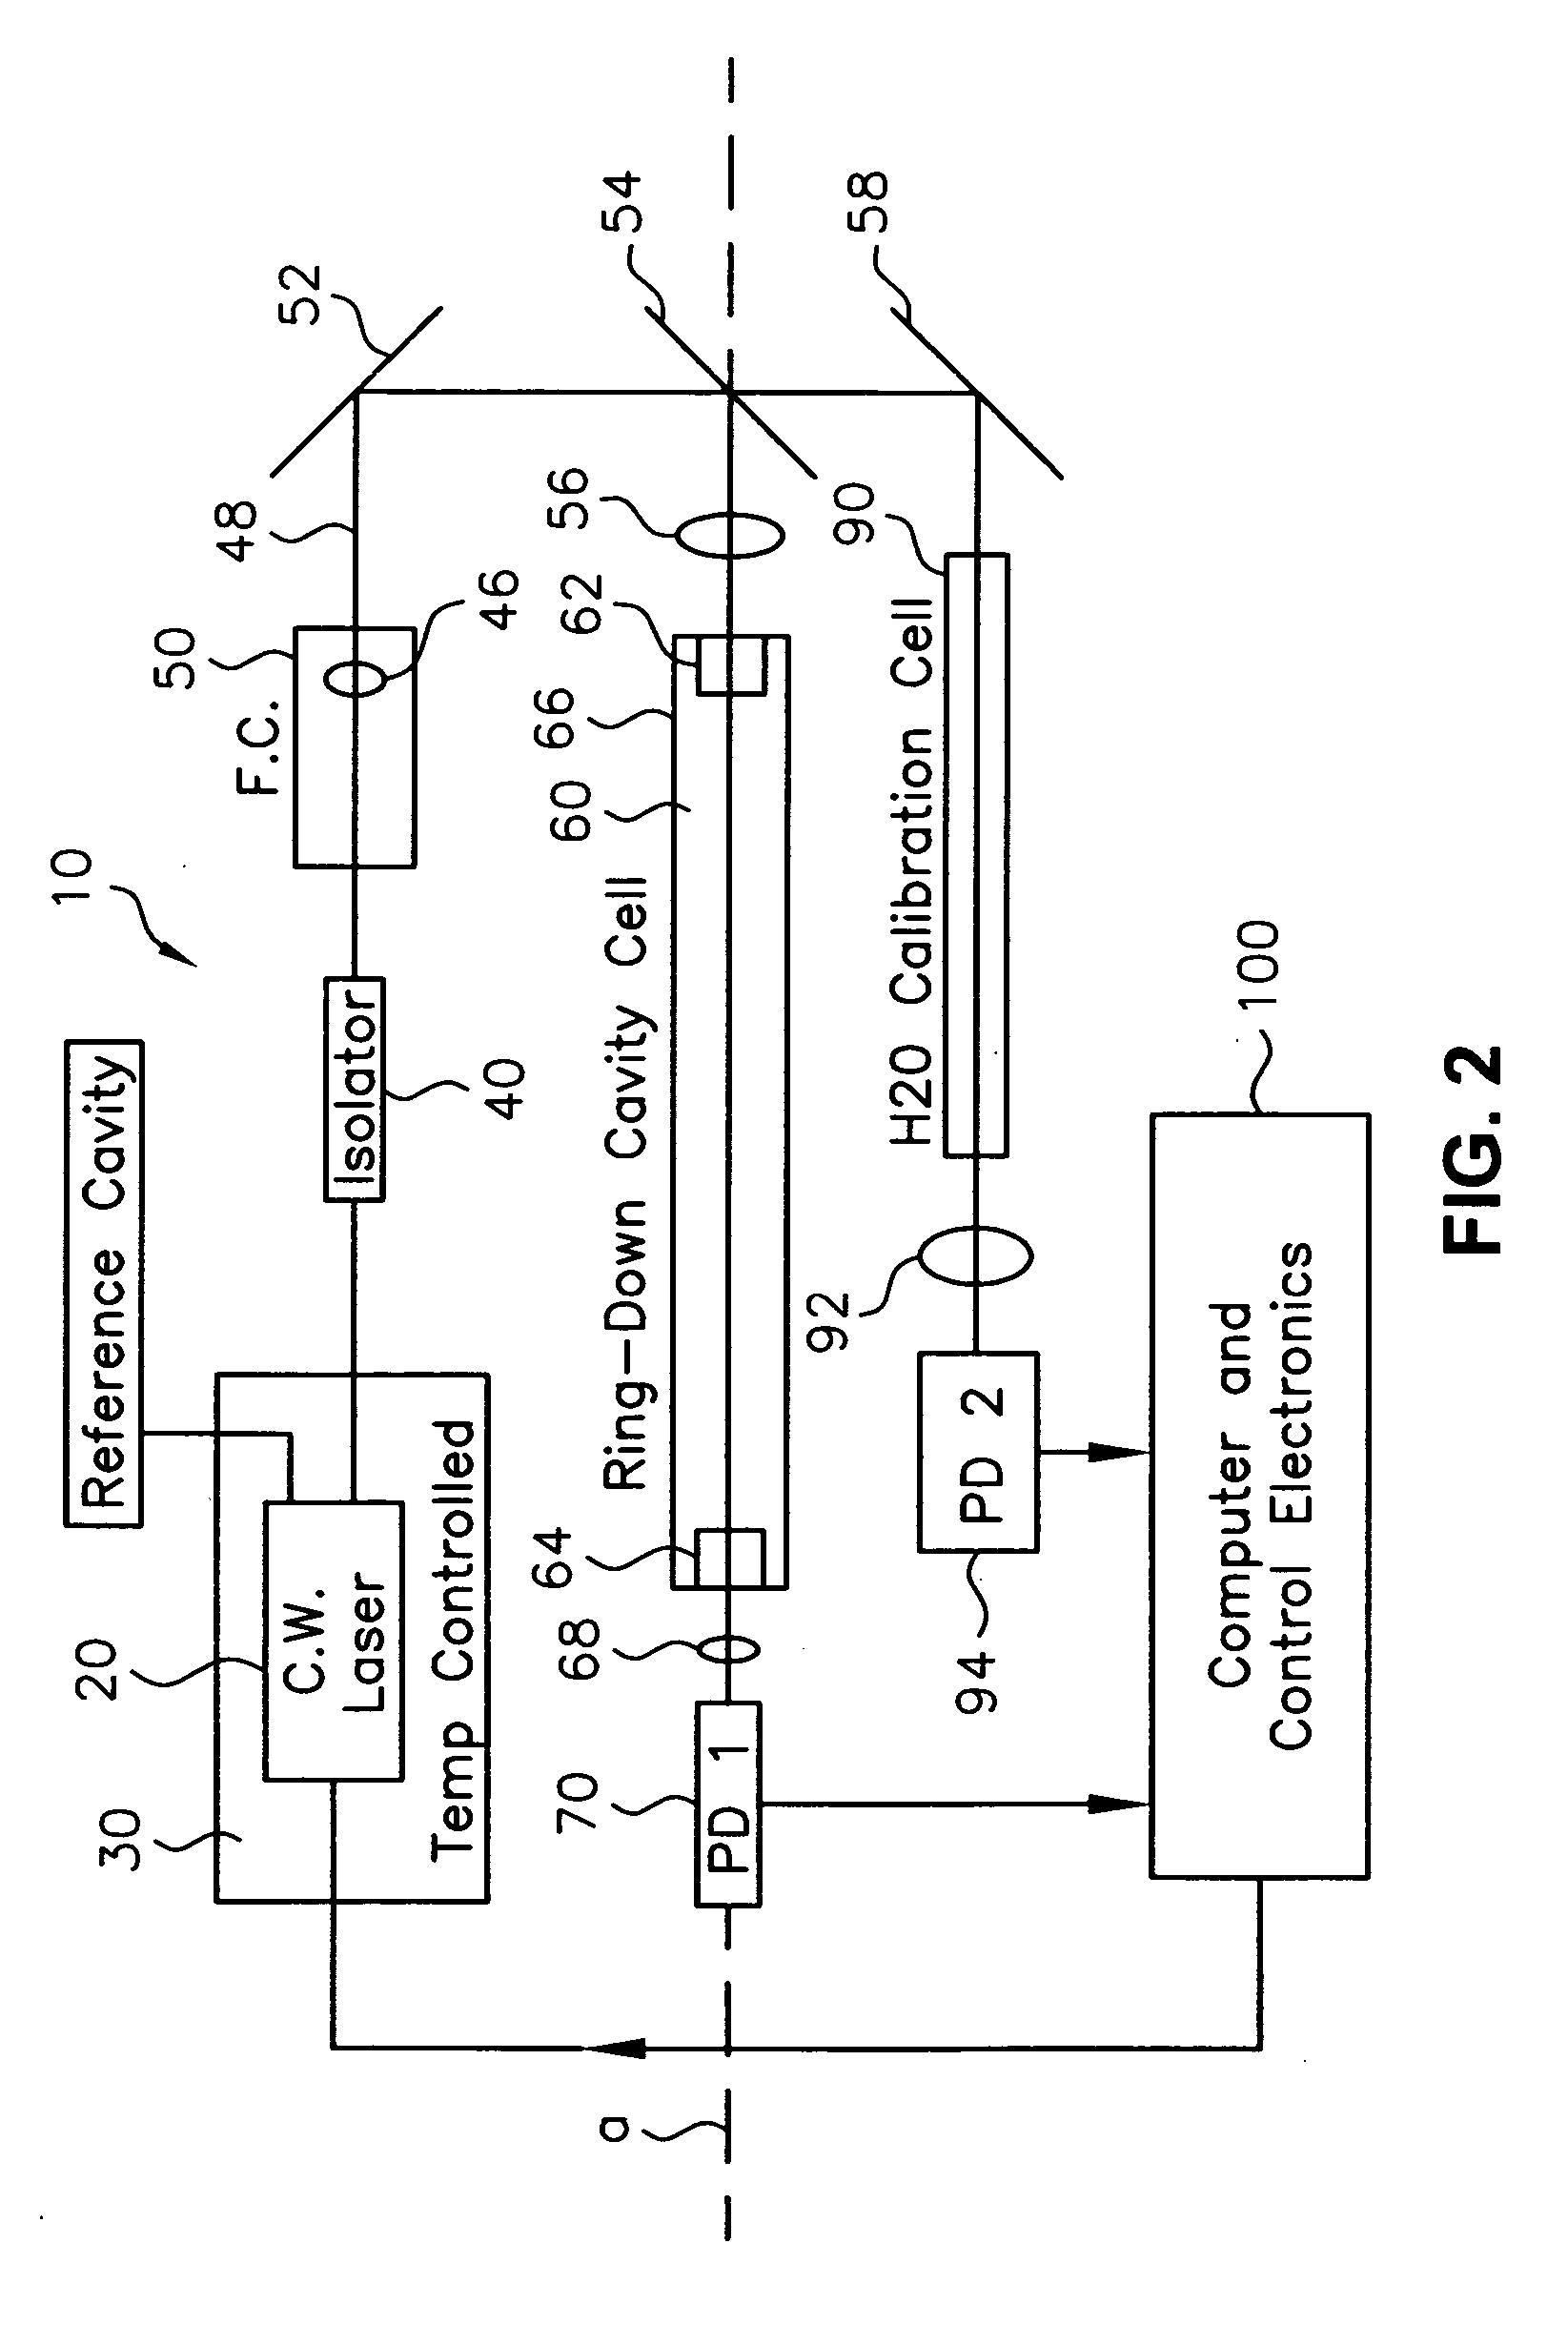 Apparatus for enhanced evanescent field exposure in an optical fiber resonator for spectroscopic detection and measurement of trace species